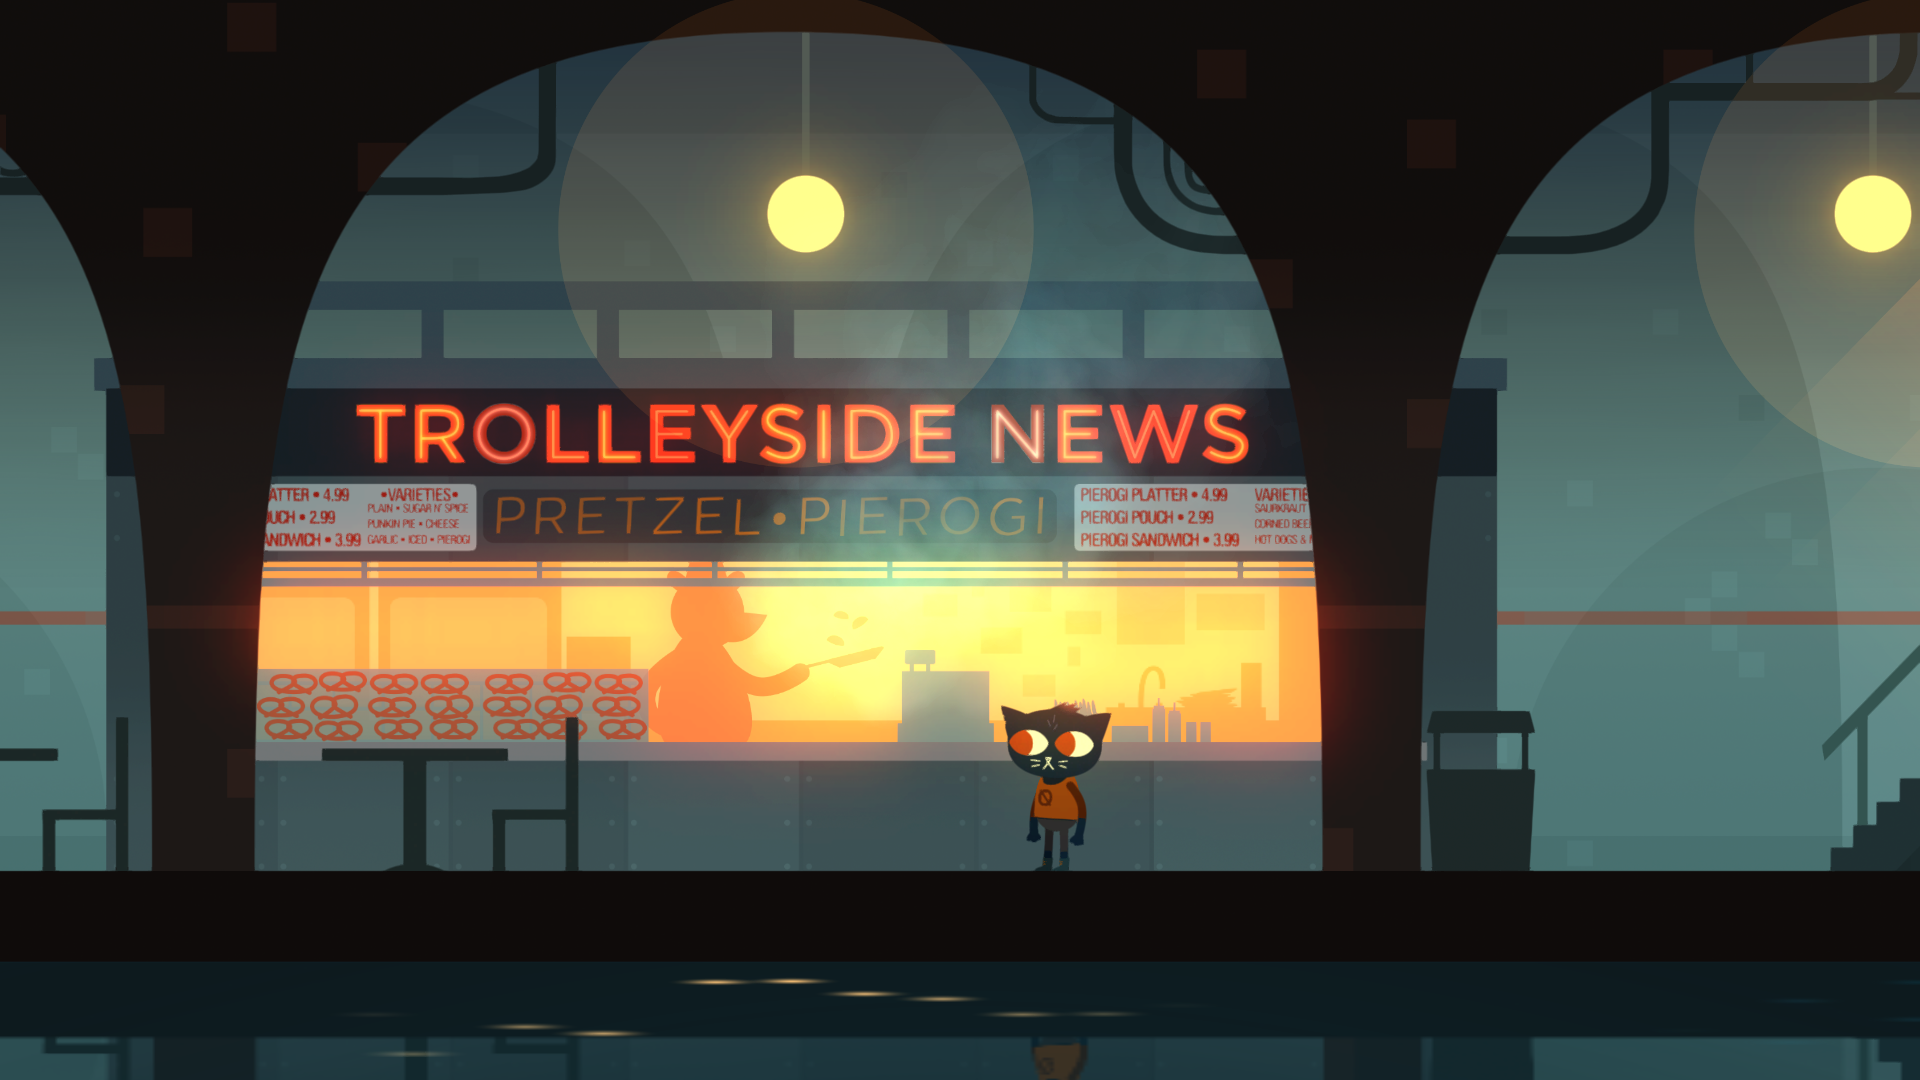 Video Game Night In The Woods 1920x1080